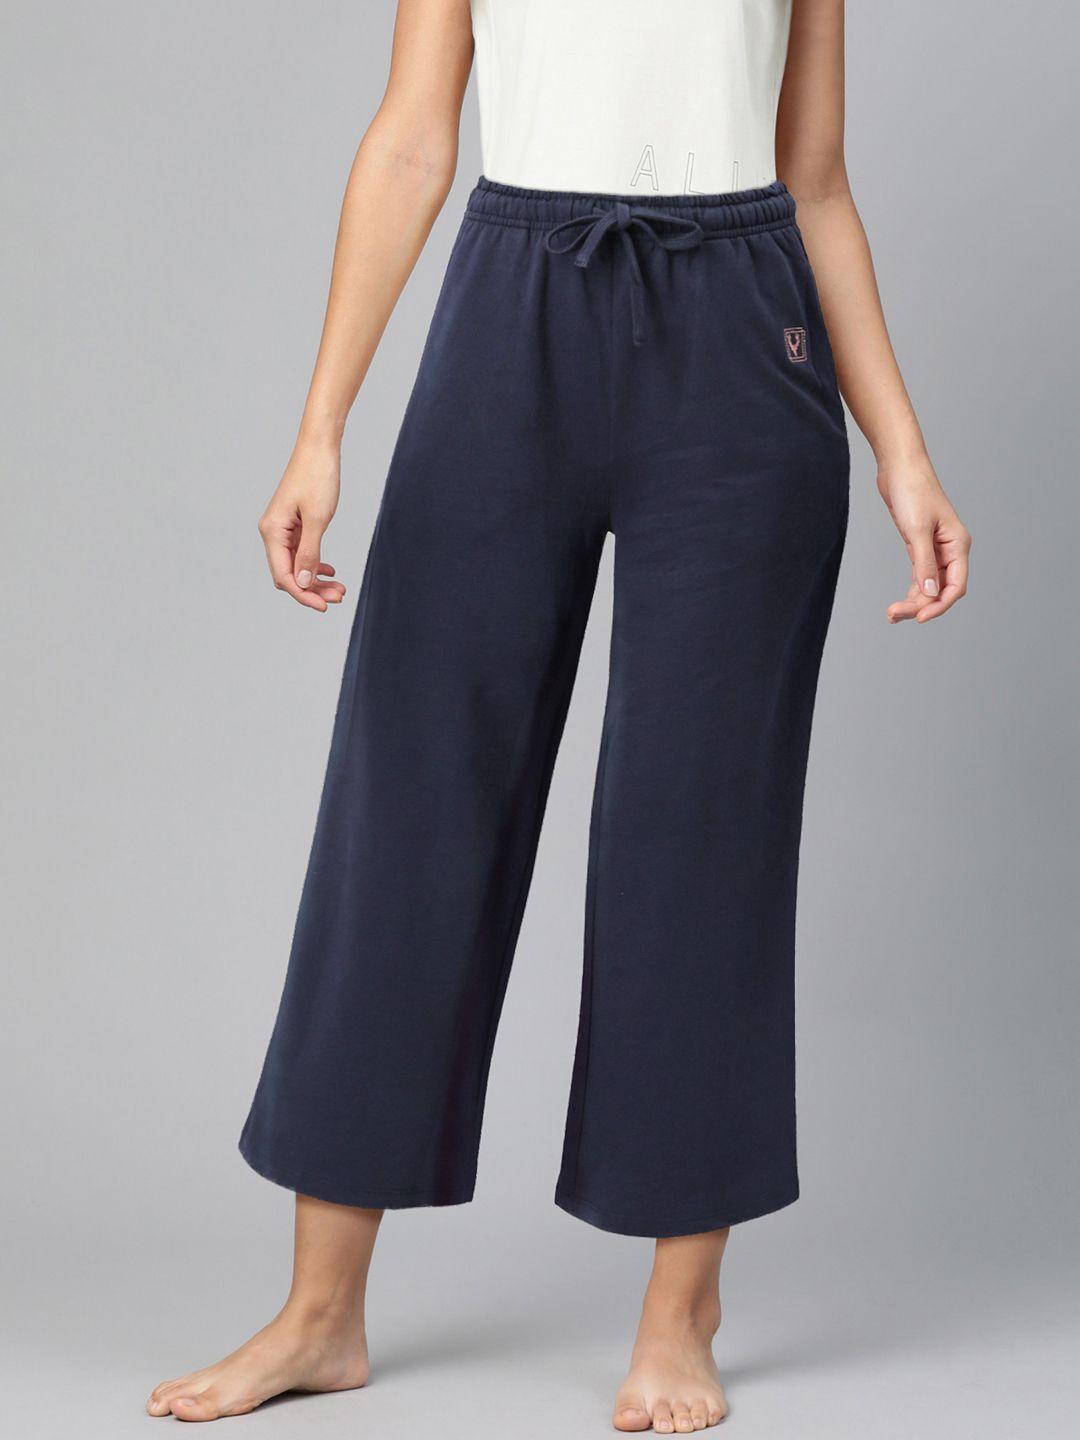 allen-solly-woman-navy-blue-solid-pure-cotton-lounge-pants